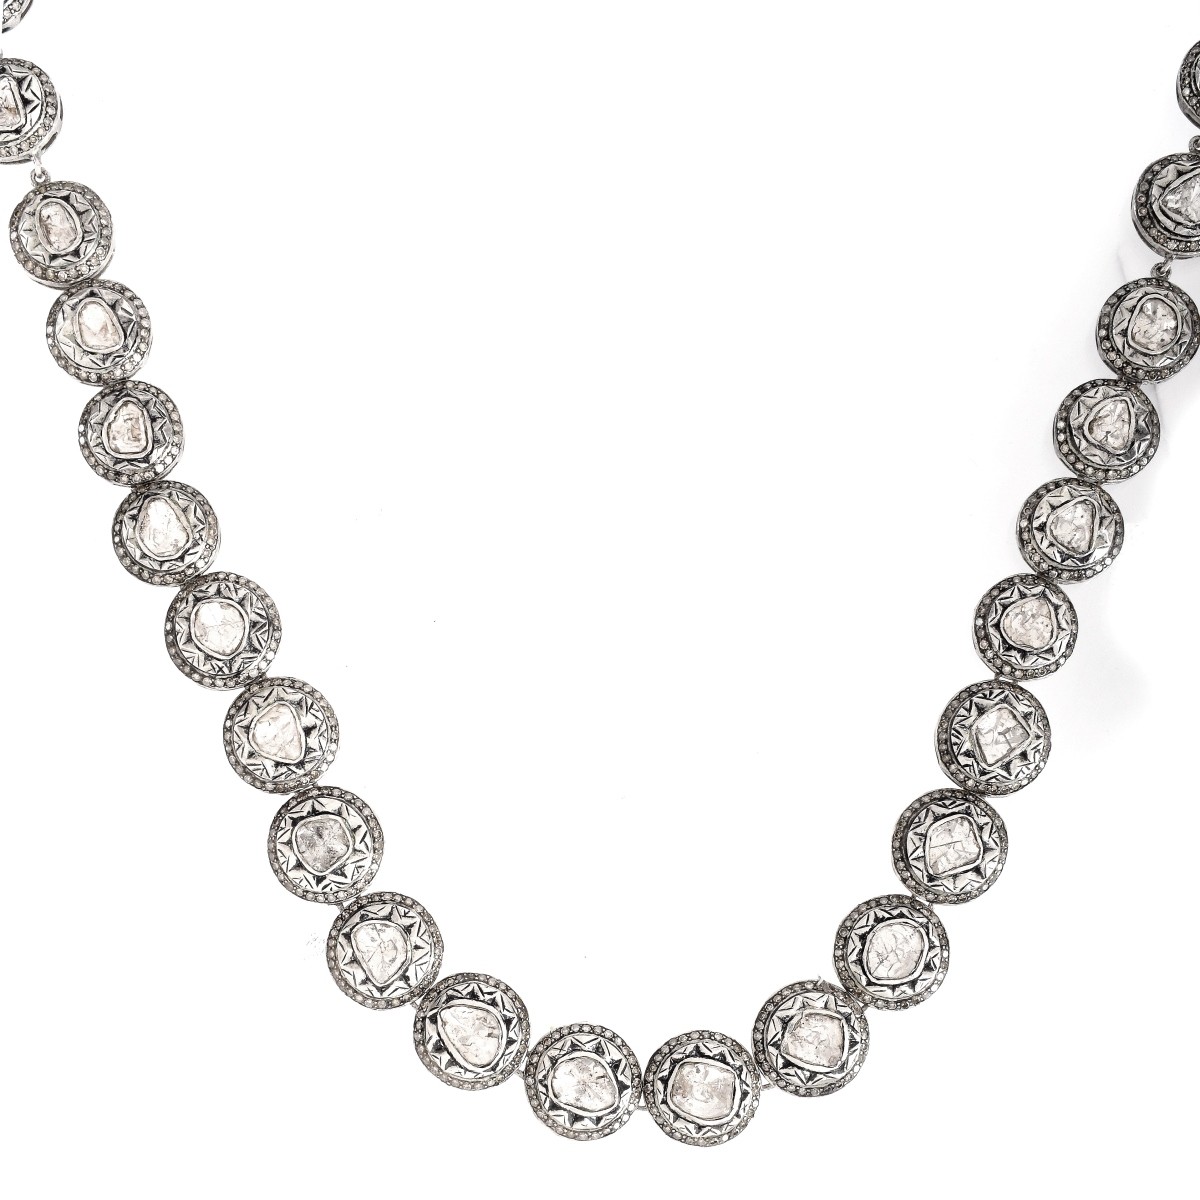 Vintage Diamond and Silver Necklace